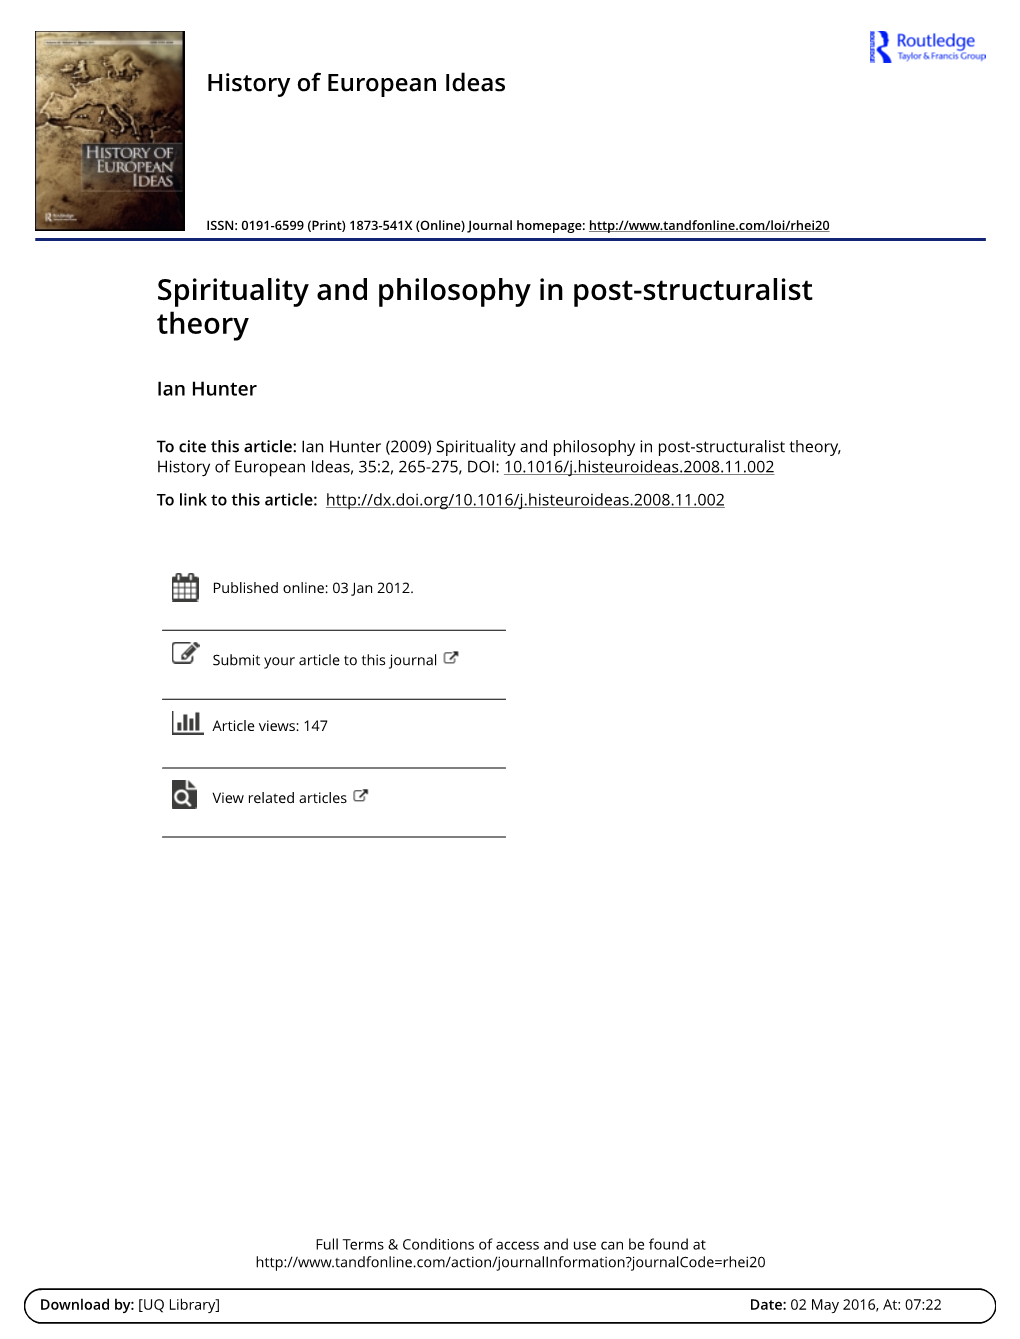 Spirituality and Philosophy in Post-Structuralist Theory